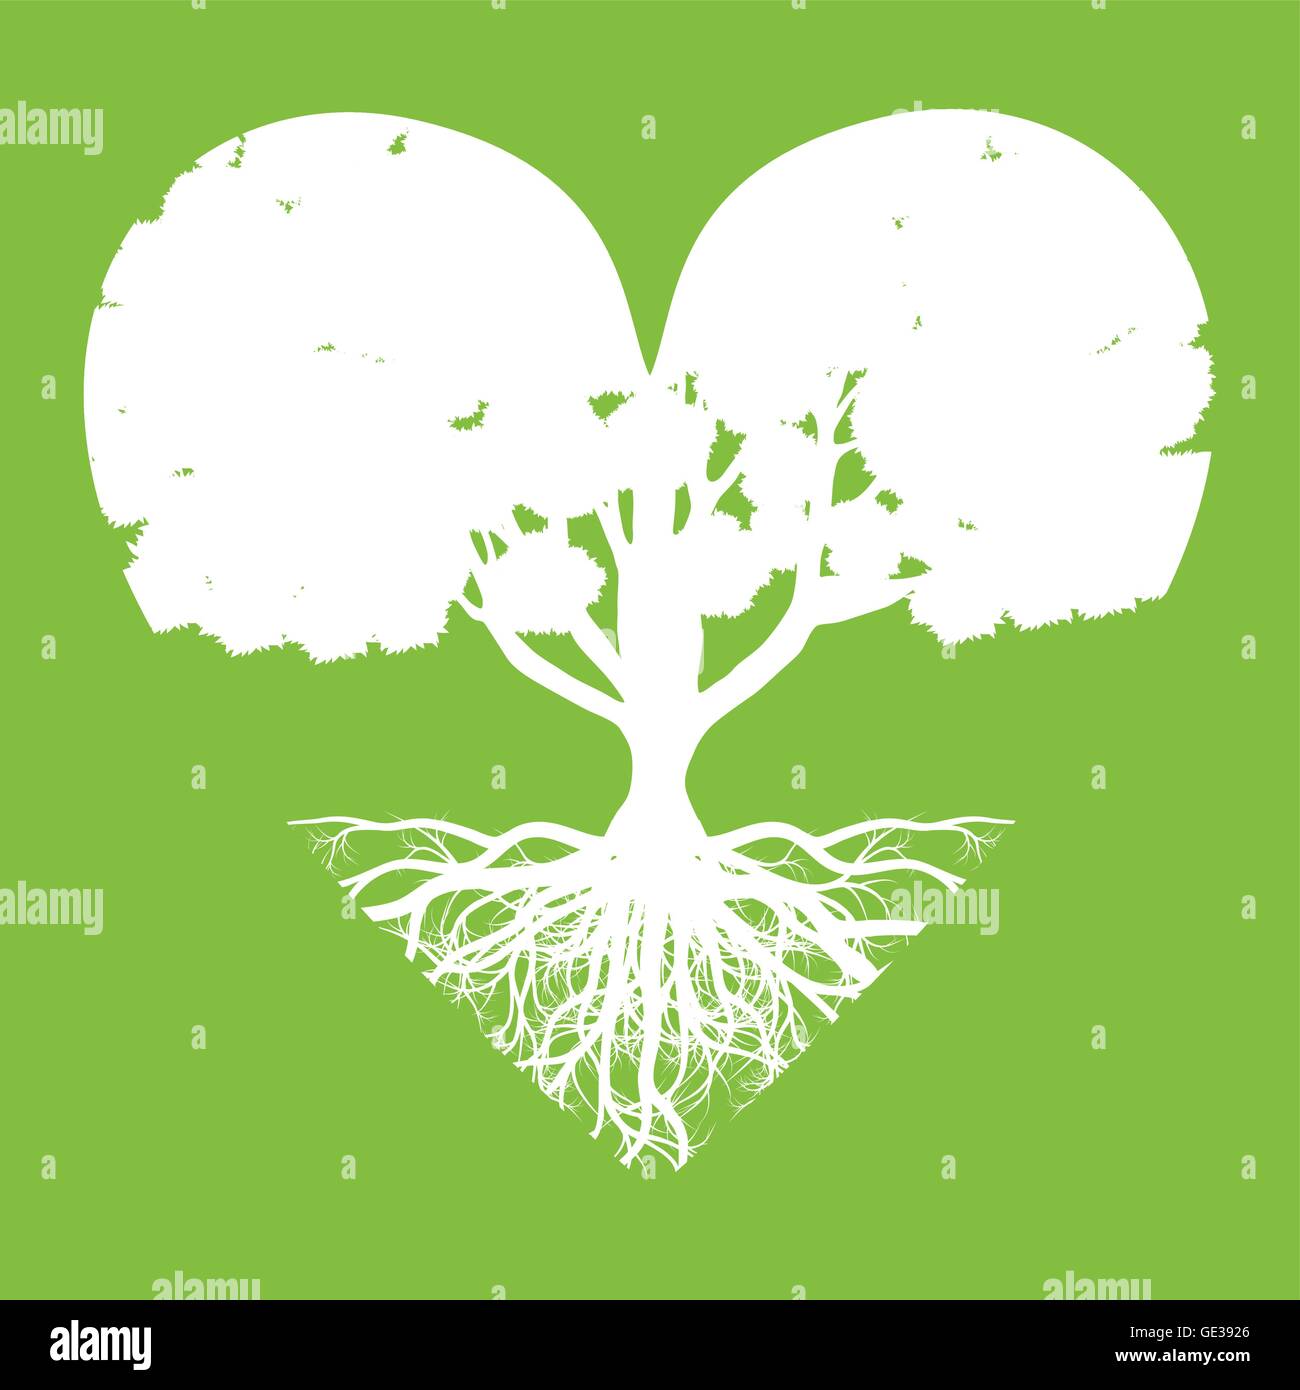 Tree of life vector background abstract ecology concept heart shape stylized tree with roots made by imagination Stock Vector